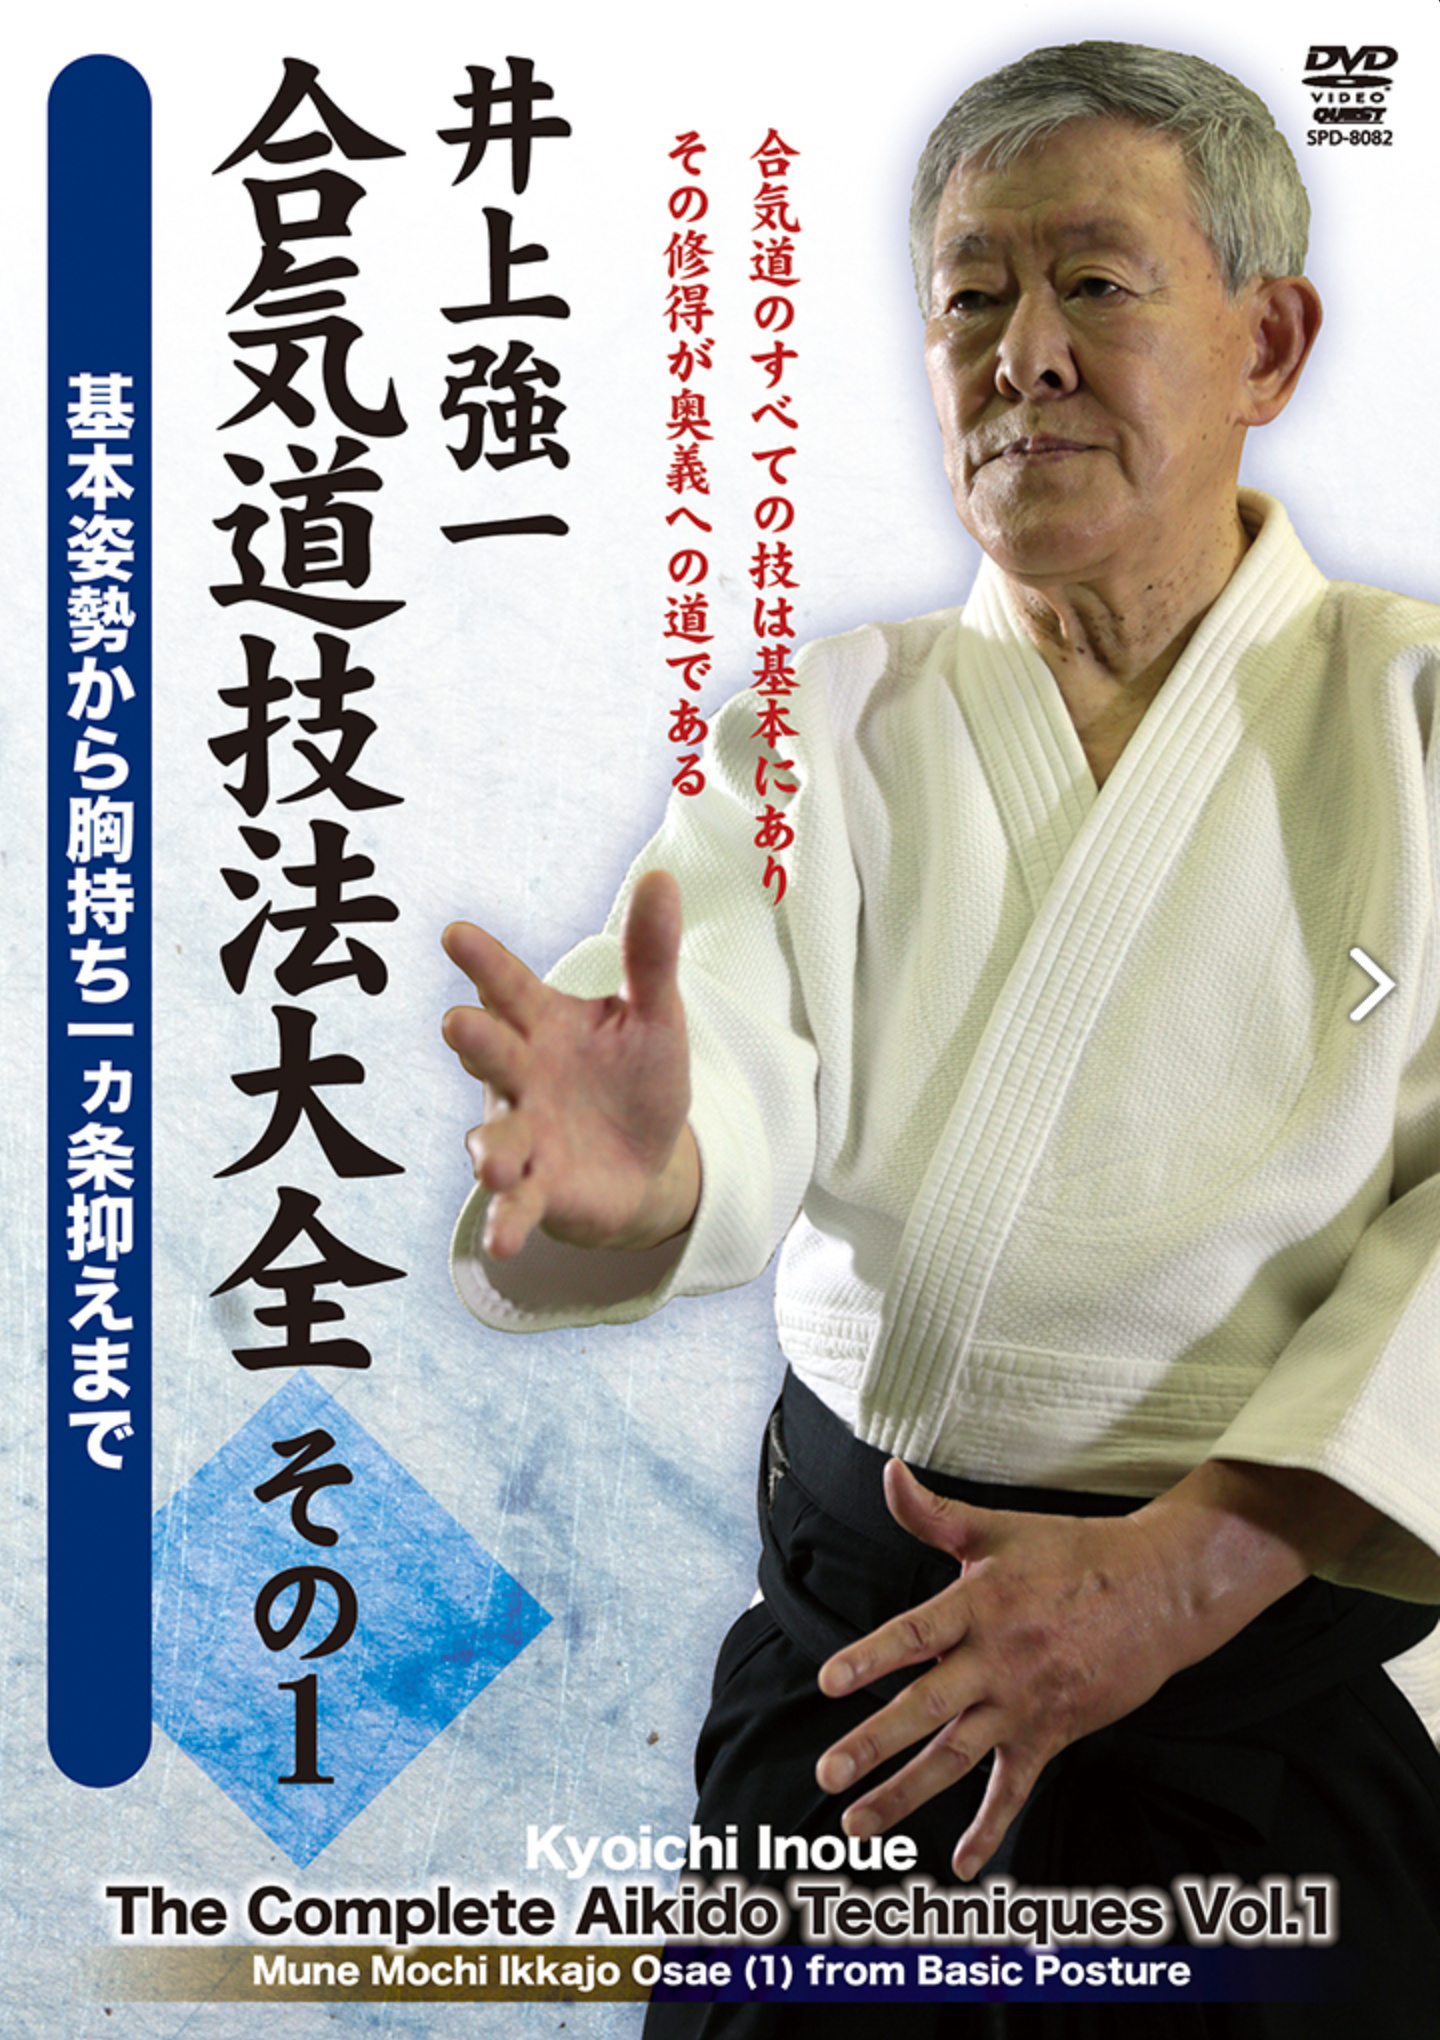 Aikido Complete Techniques DVD 1 by Kyoichi Inoue - Budovideos Inc